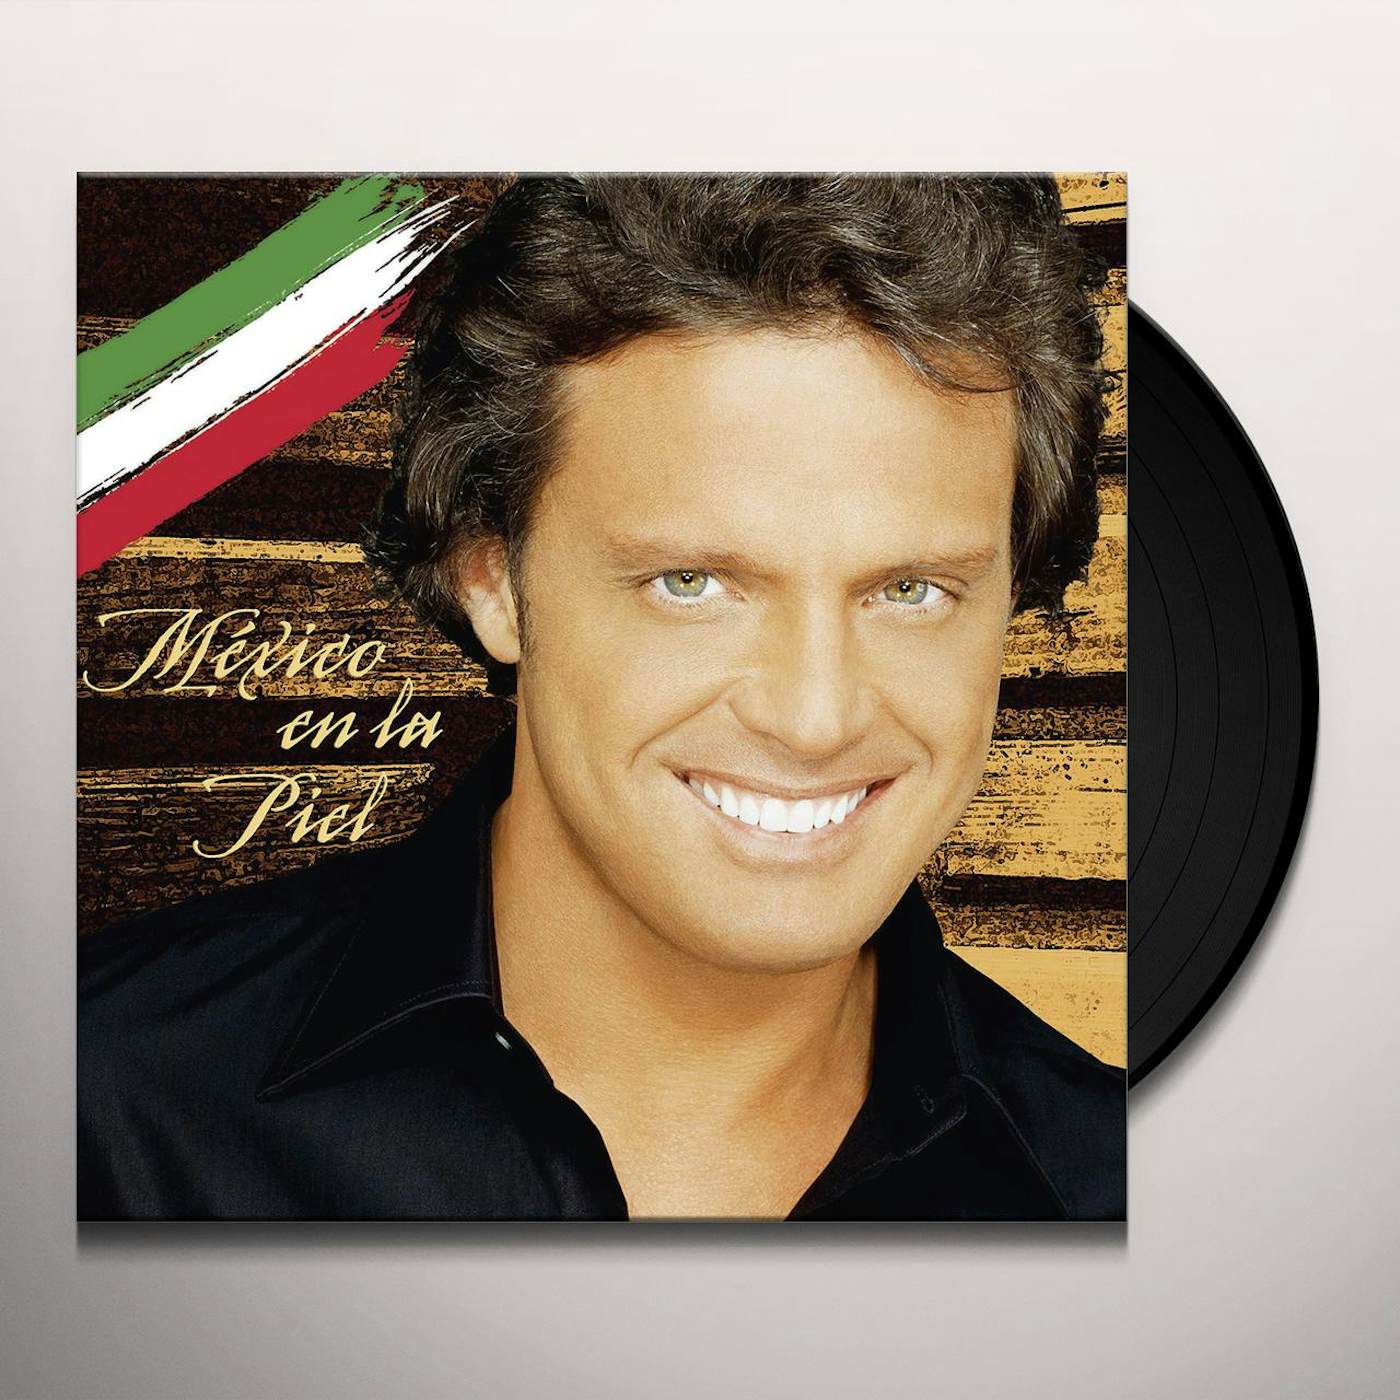 Tote Bag LM – Luis Miguel Official Merchandising